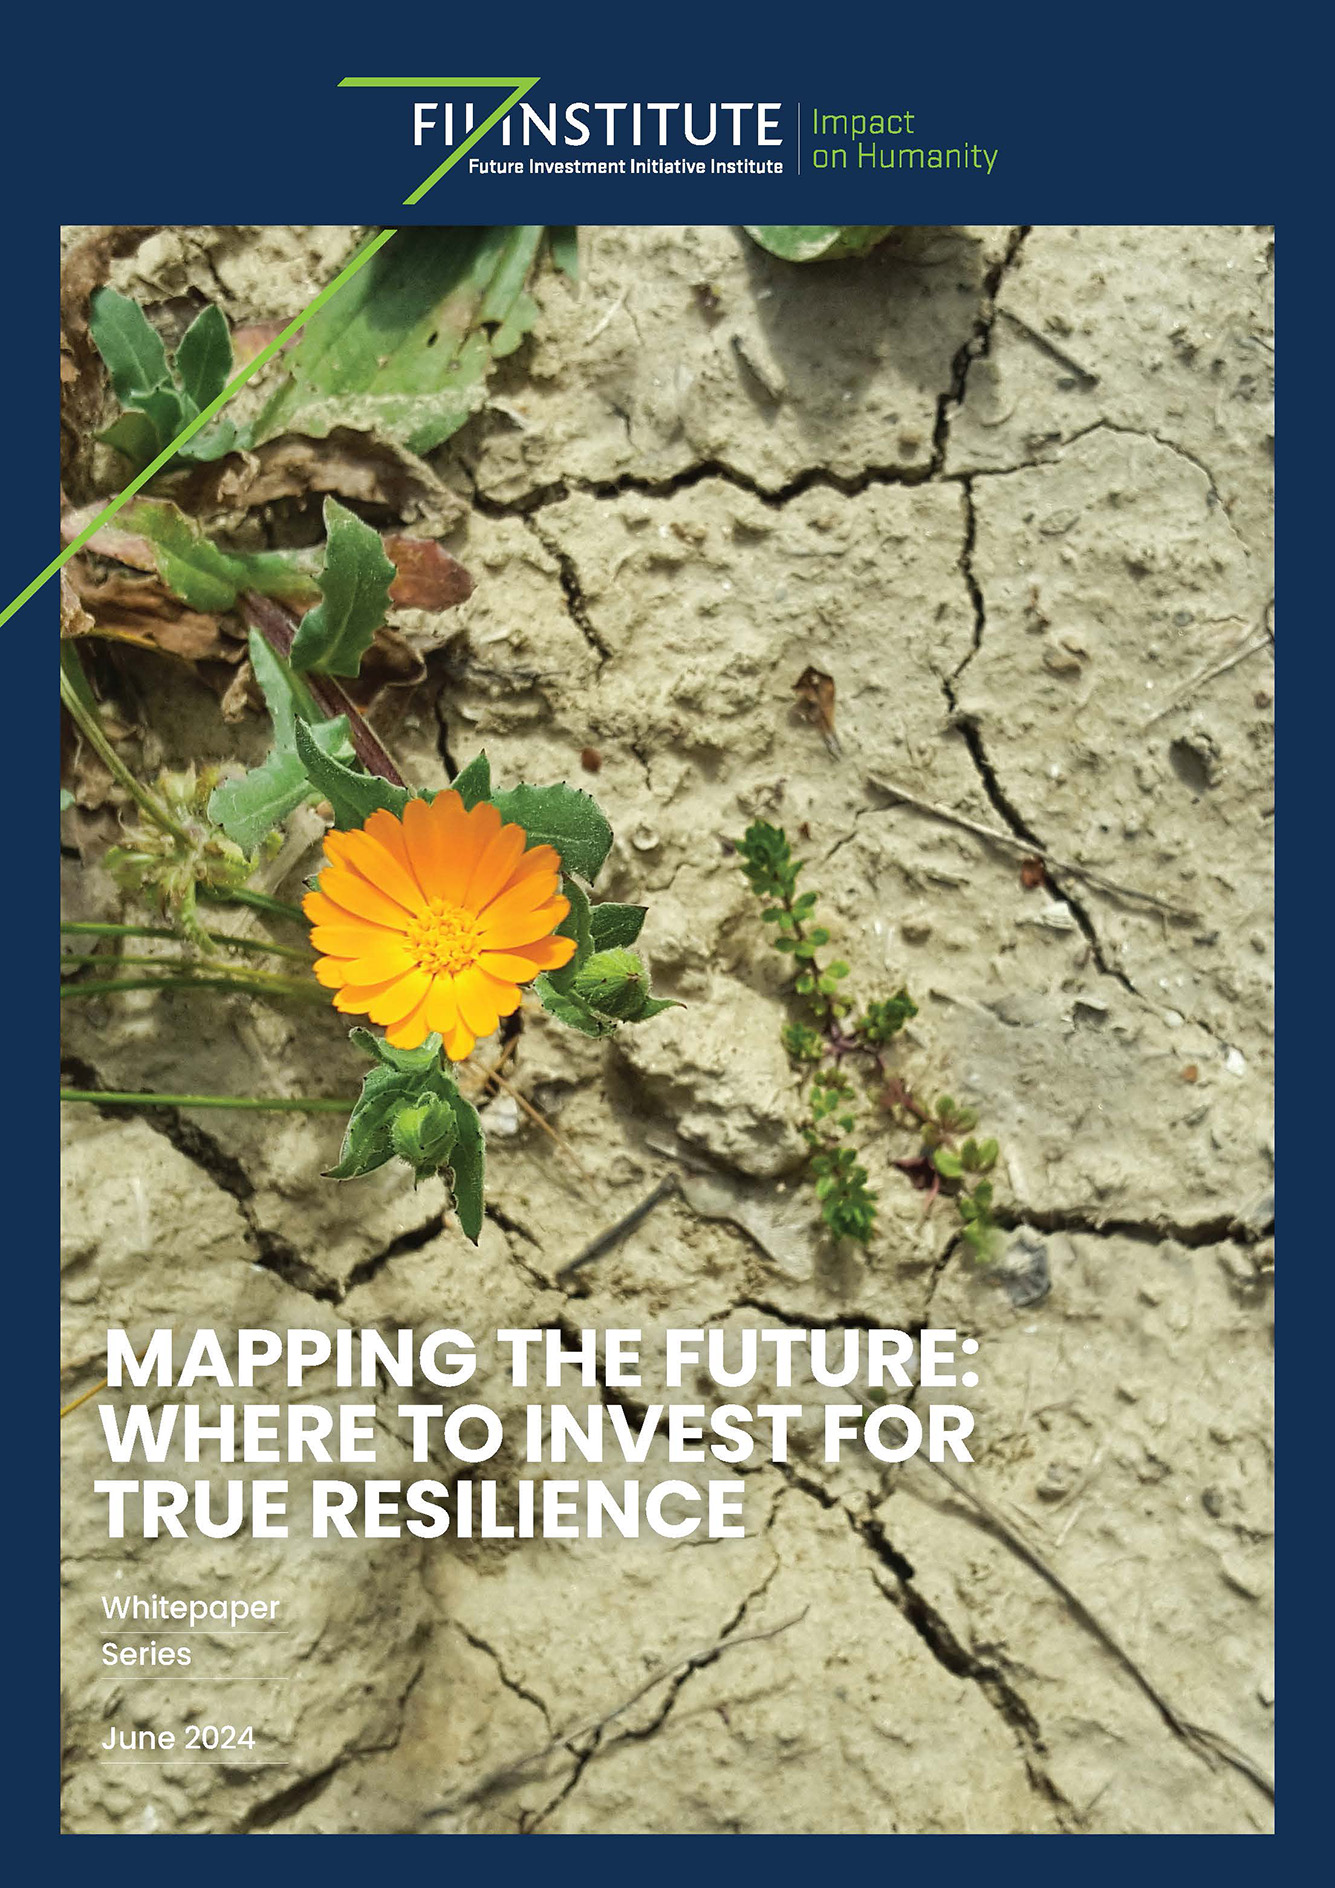 Where to Invest for True Resilience